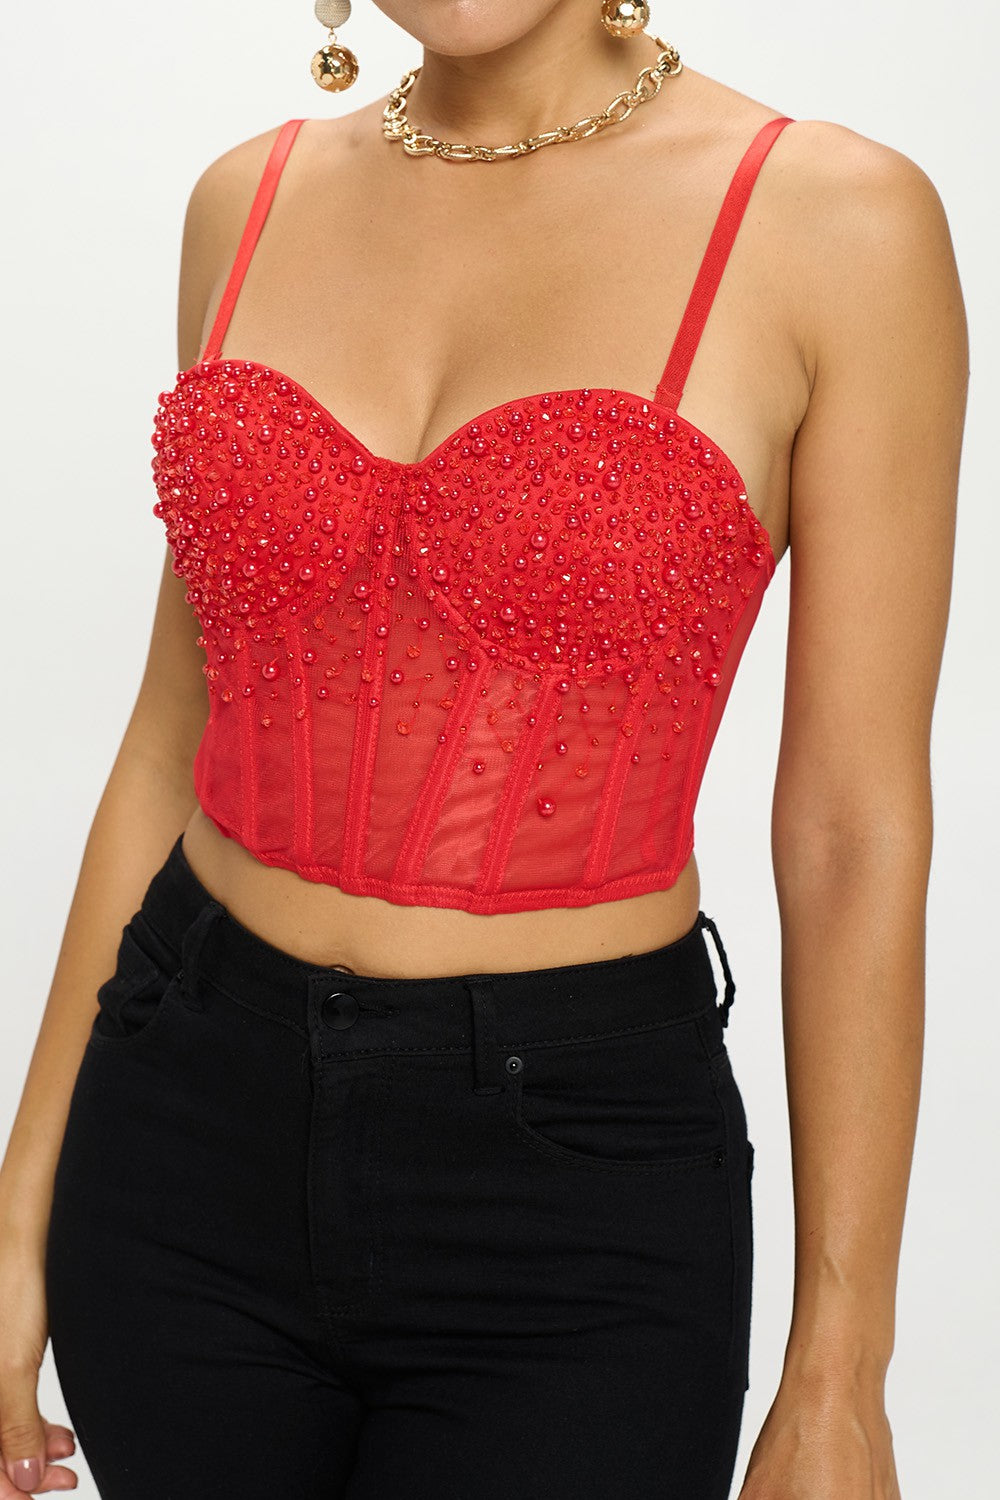 FLORAL LACE BEADING EMBELLISHED BUSTIER TOP